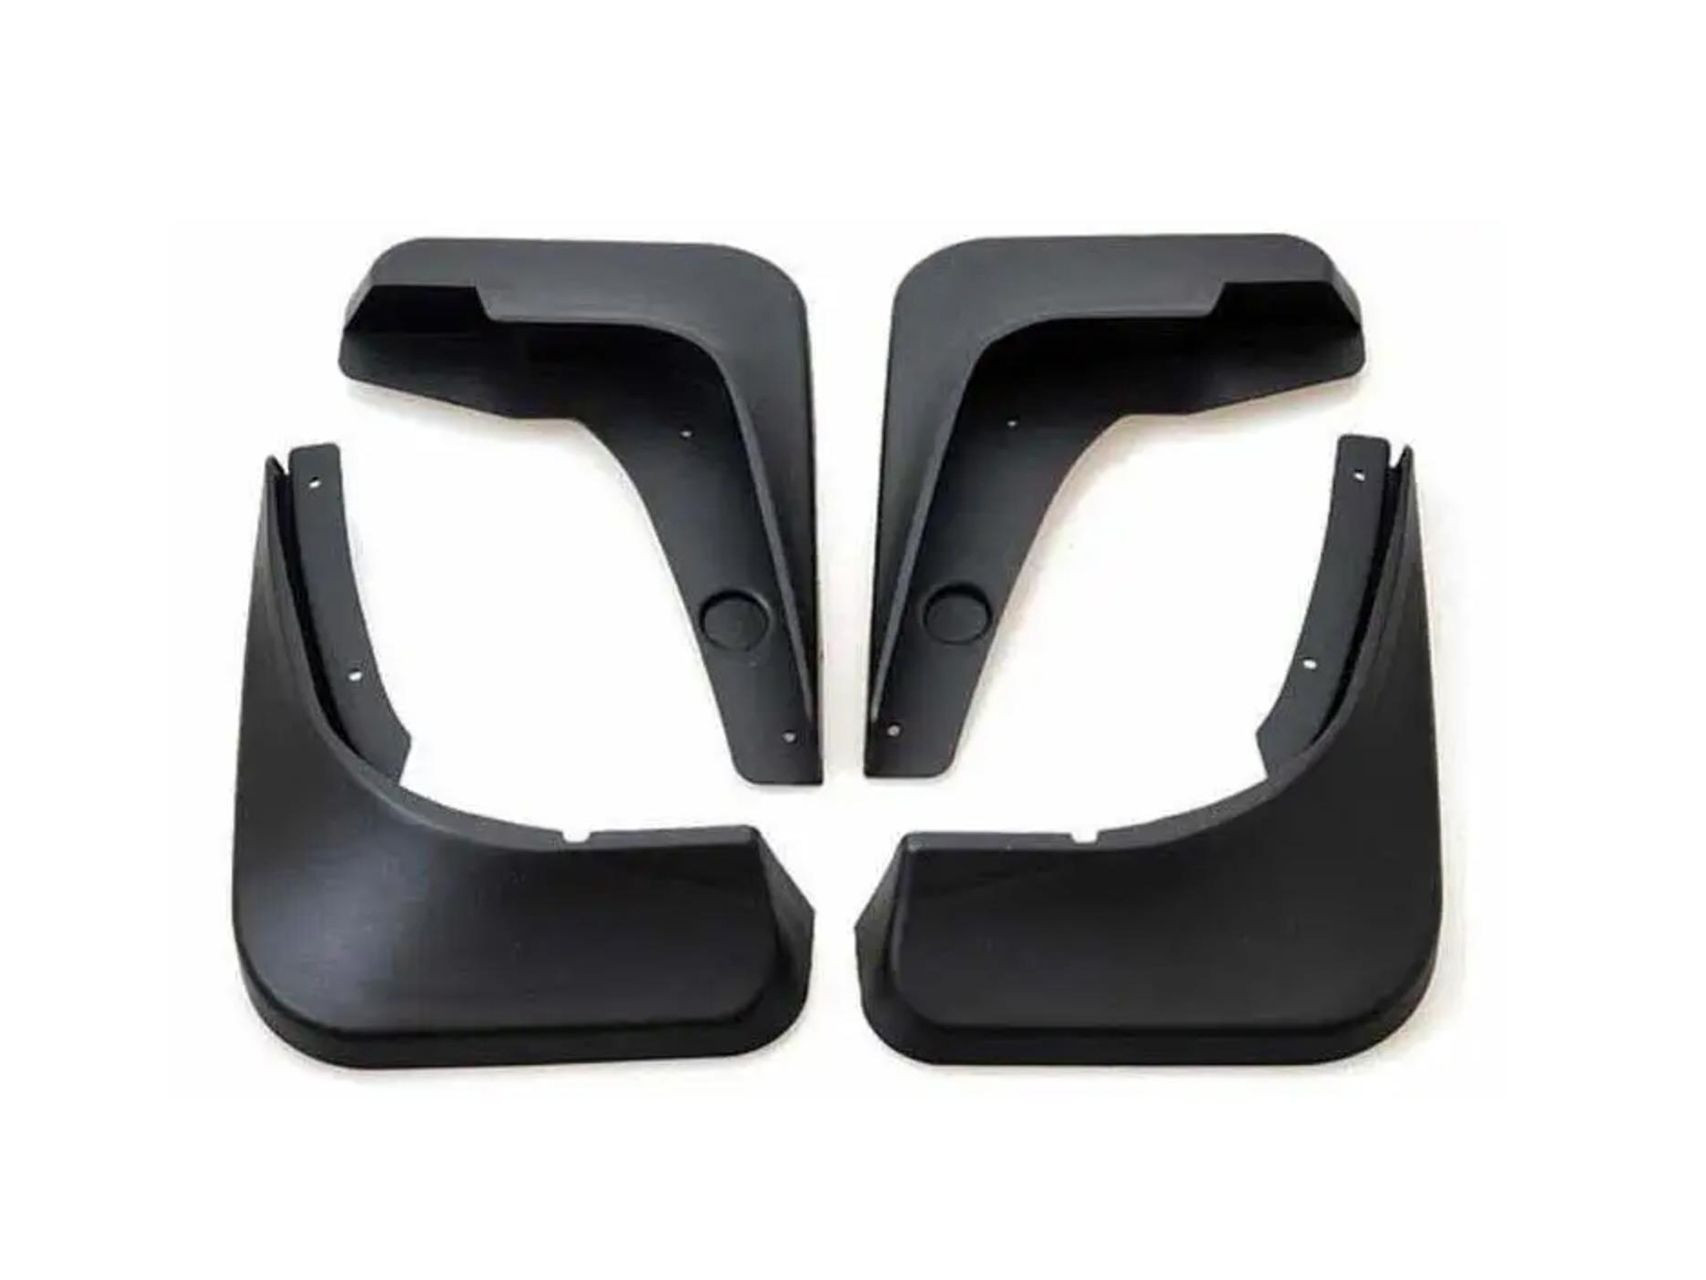 High-Quality Injection Molded Plastic Car Fender